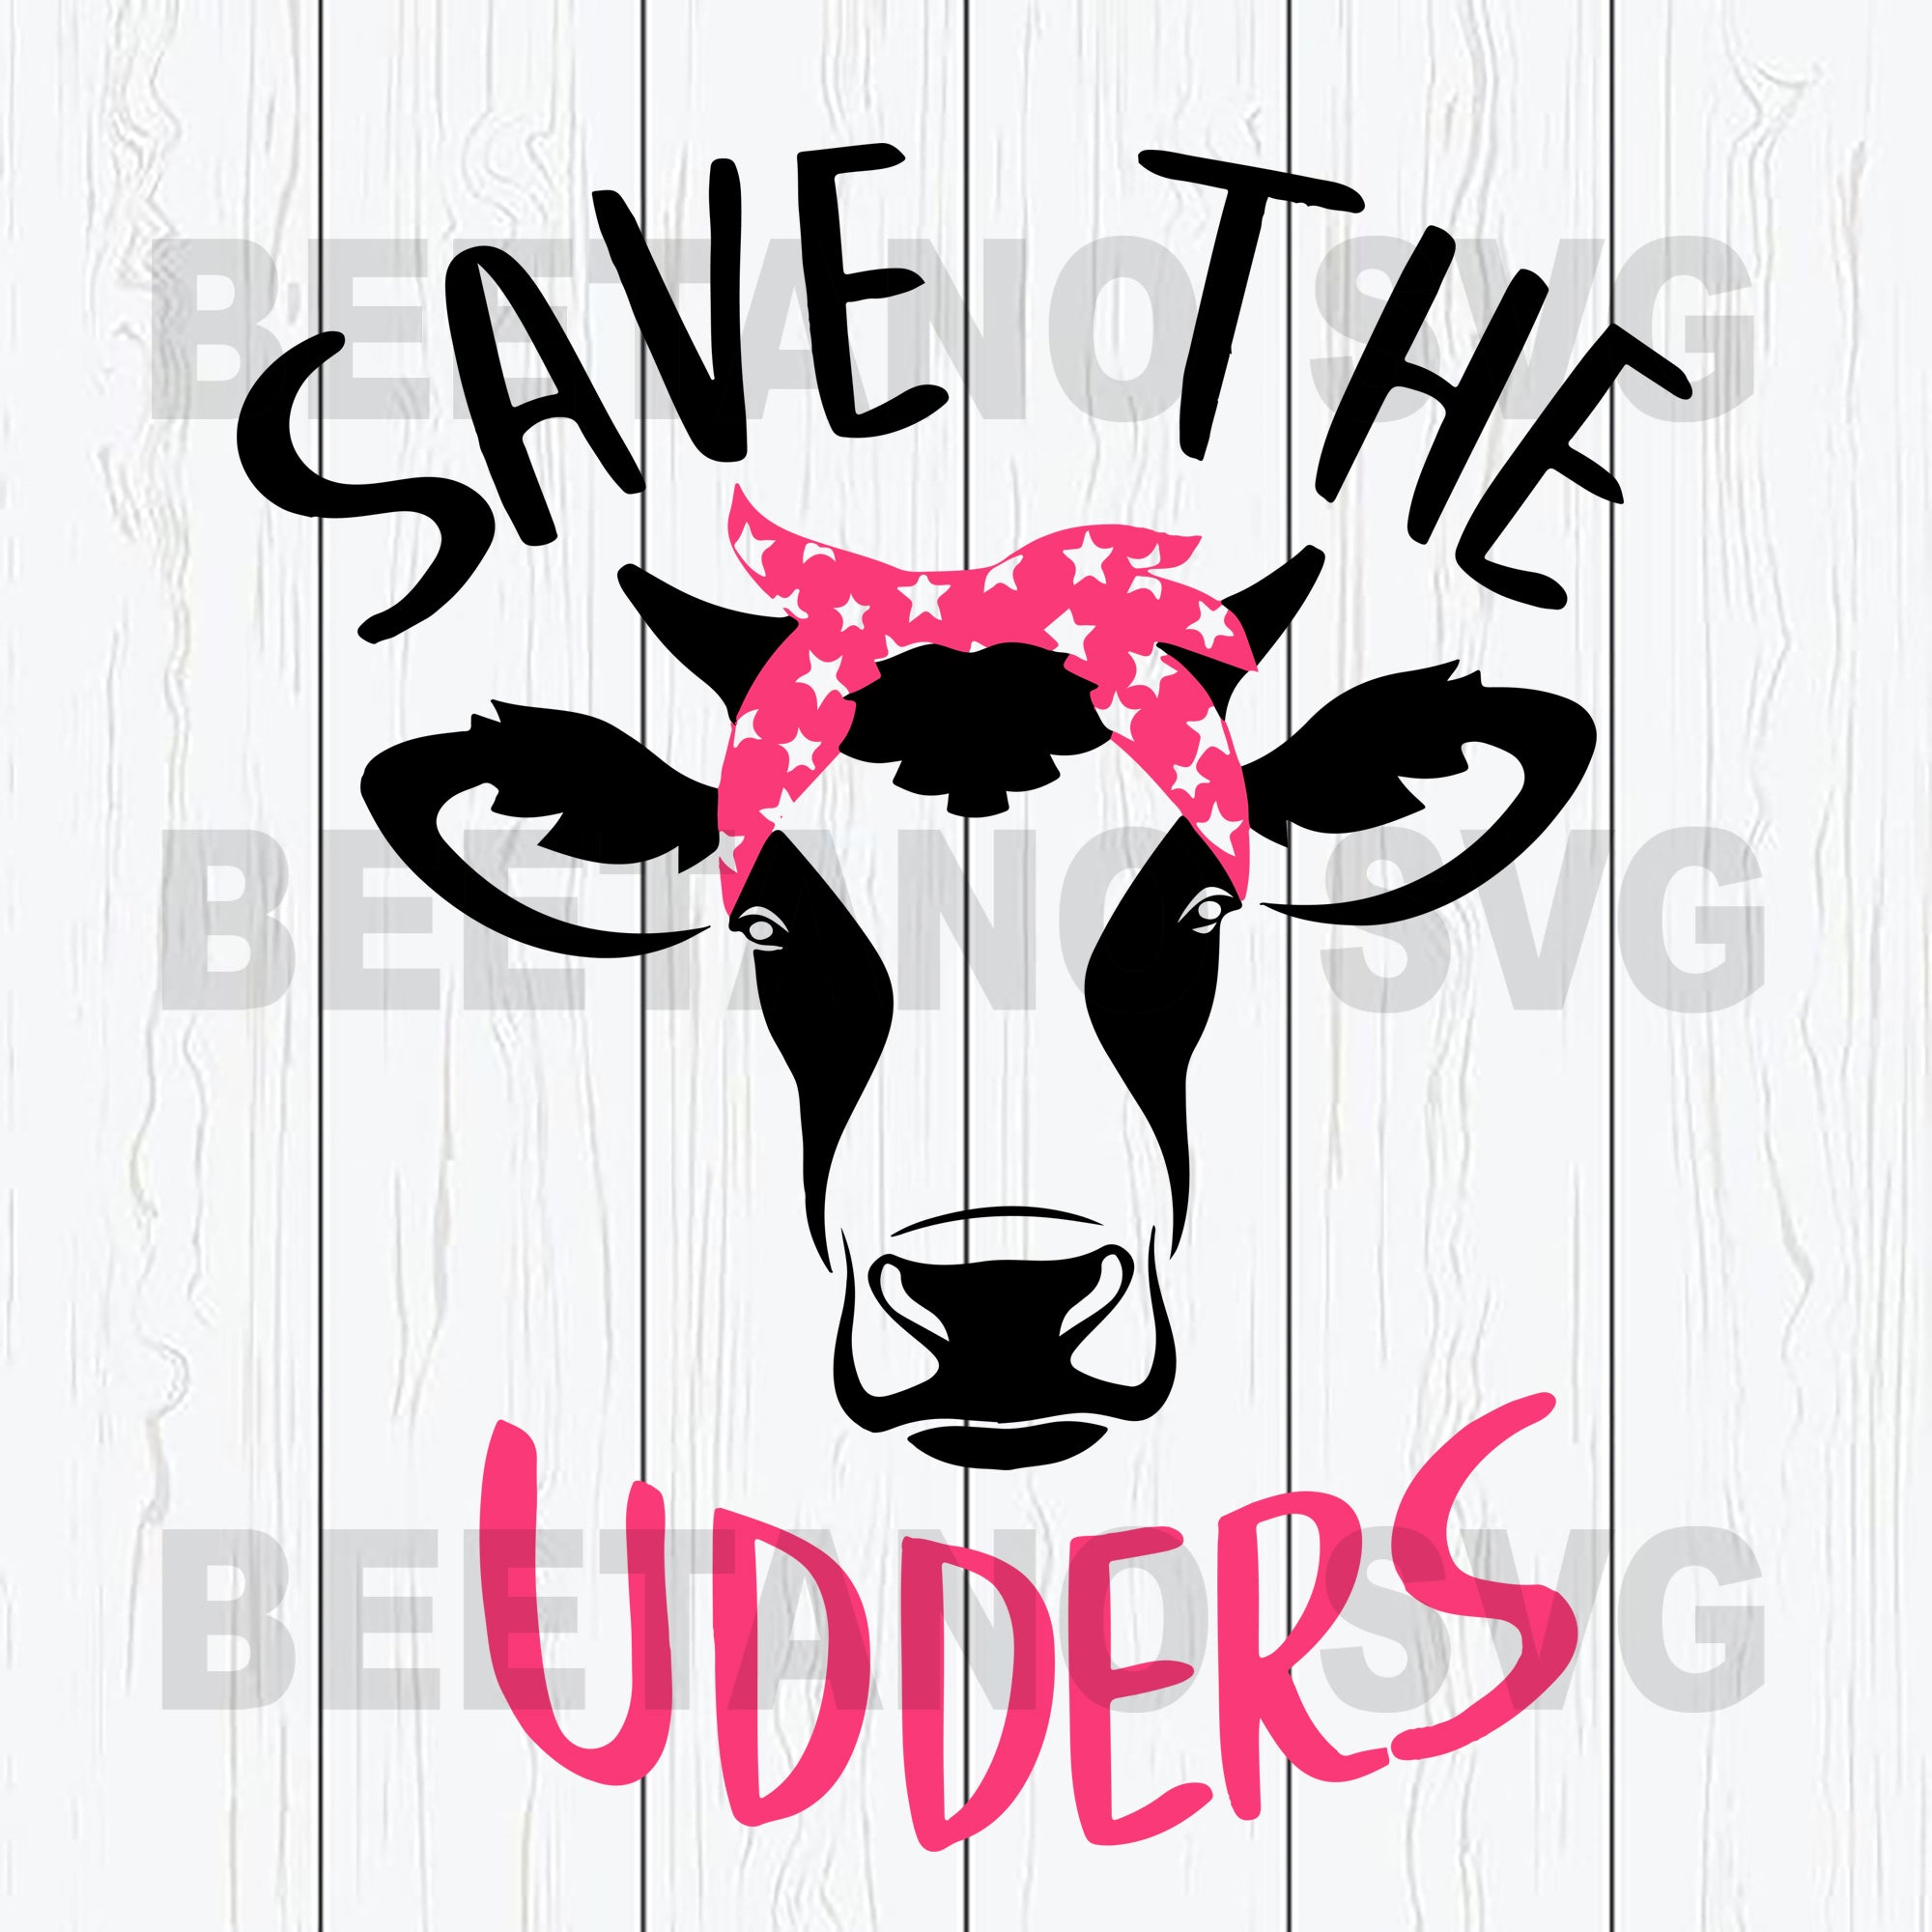 Download Save The Udders Mama Cow Svg Files Heifei Svg Files For Instant Downl Beetanosvg Scalable Vector Graphics